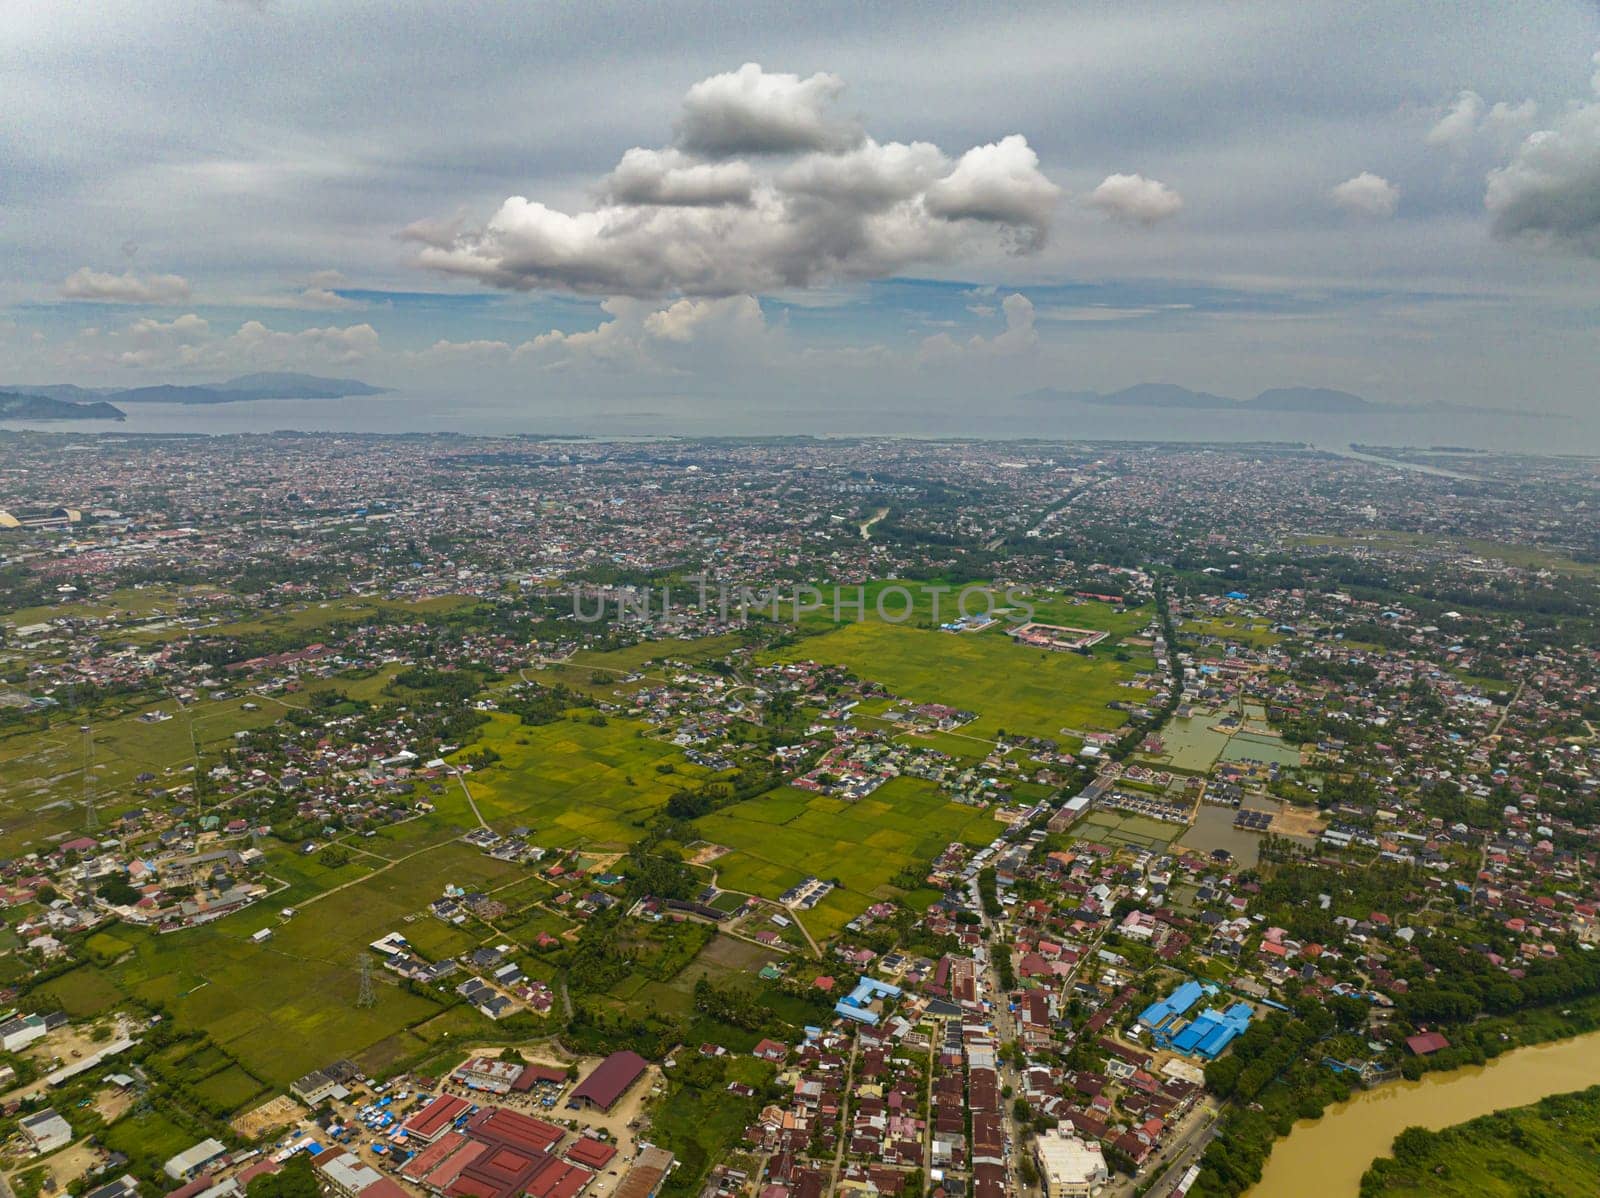 Aerial view of Banda Aceh is the capital and largest city in the province of Aceh. Sumatra, Indonesia.